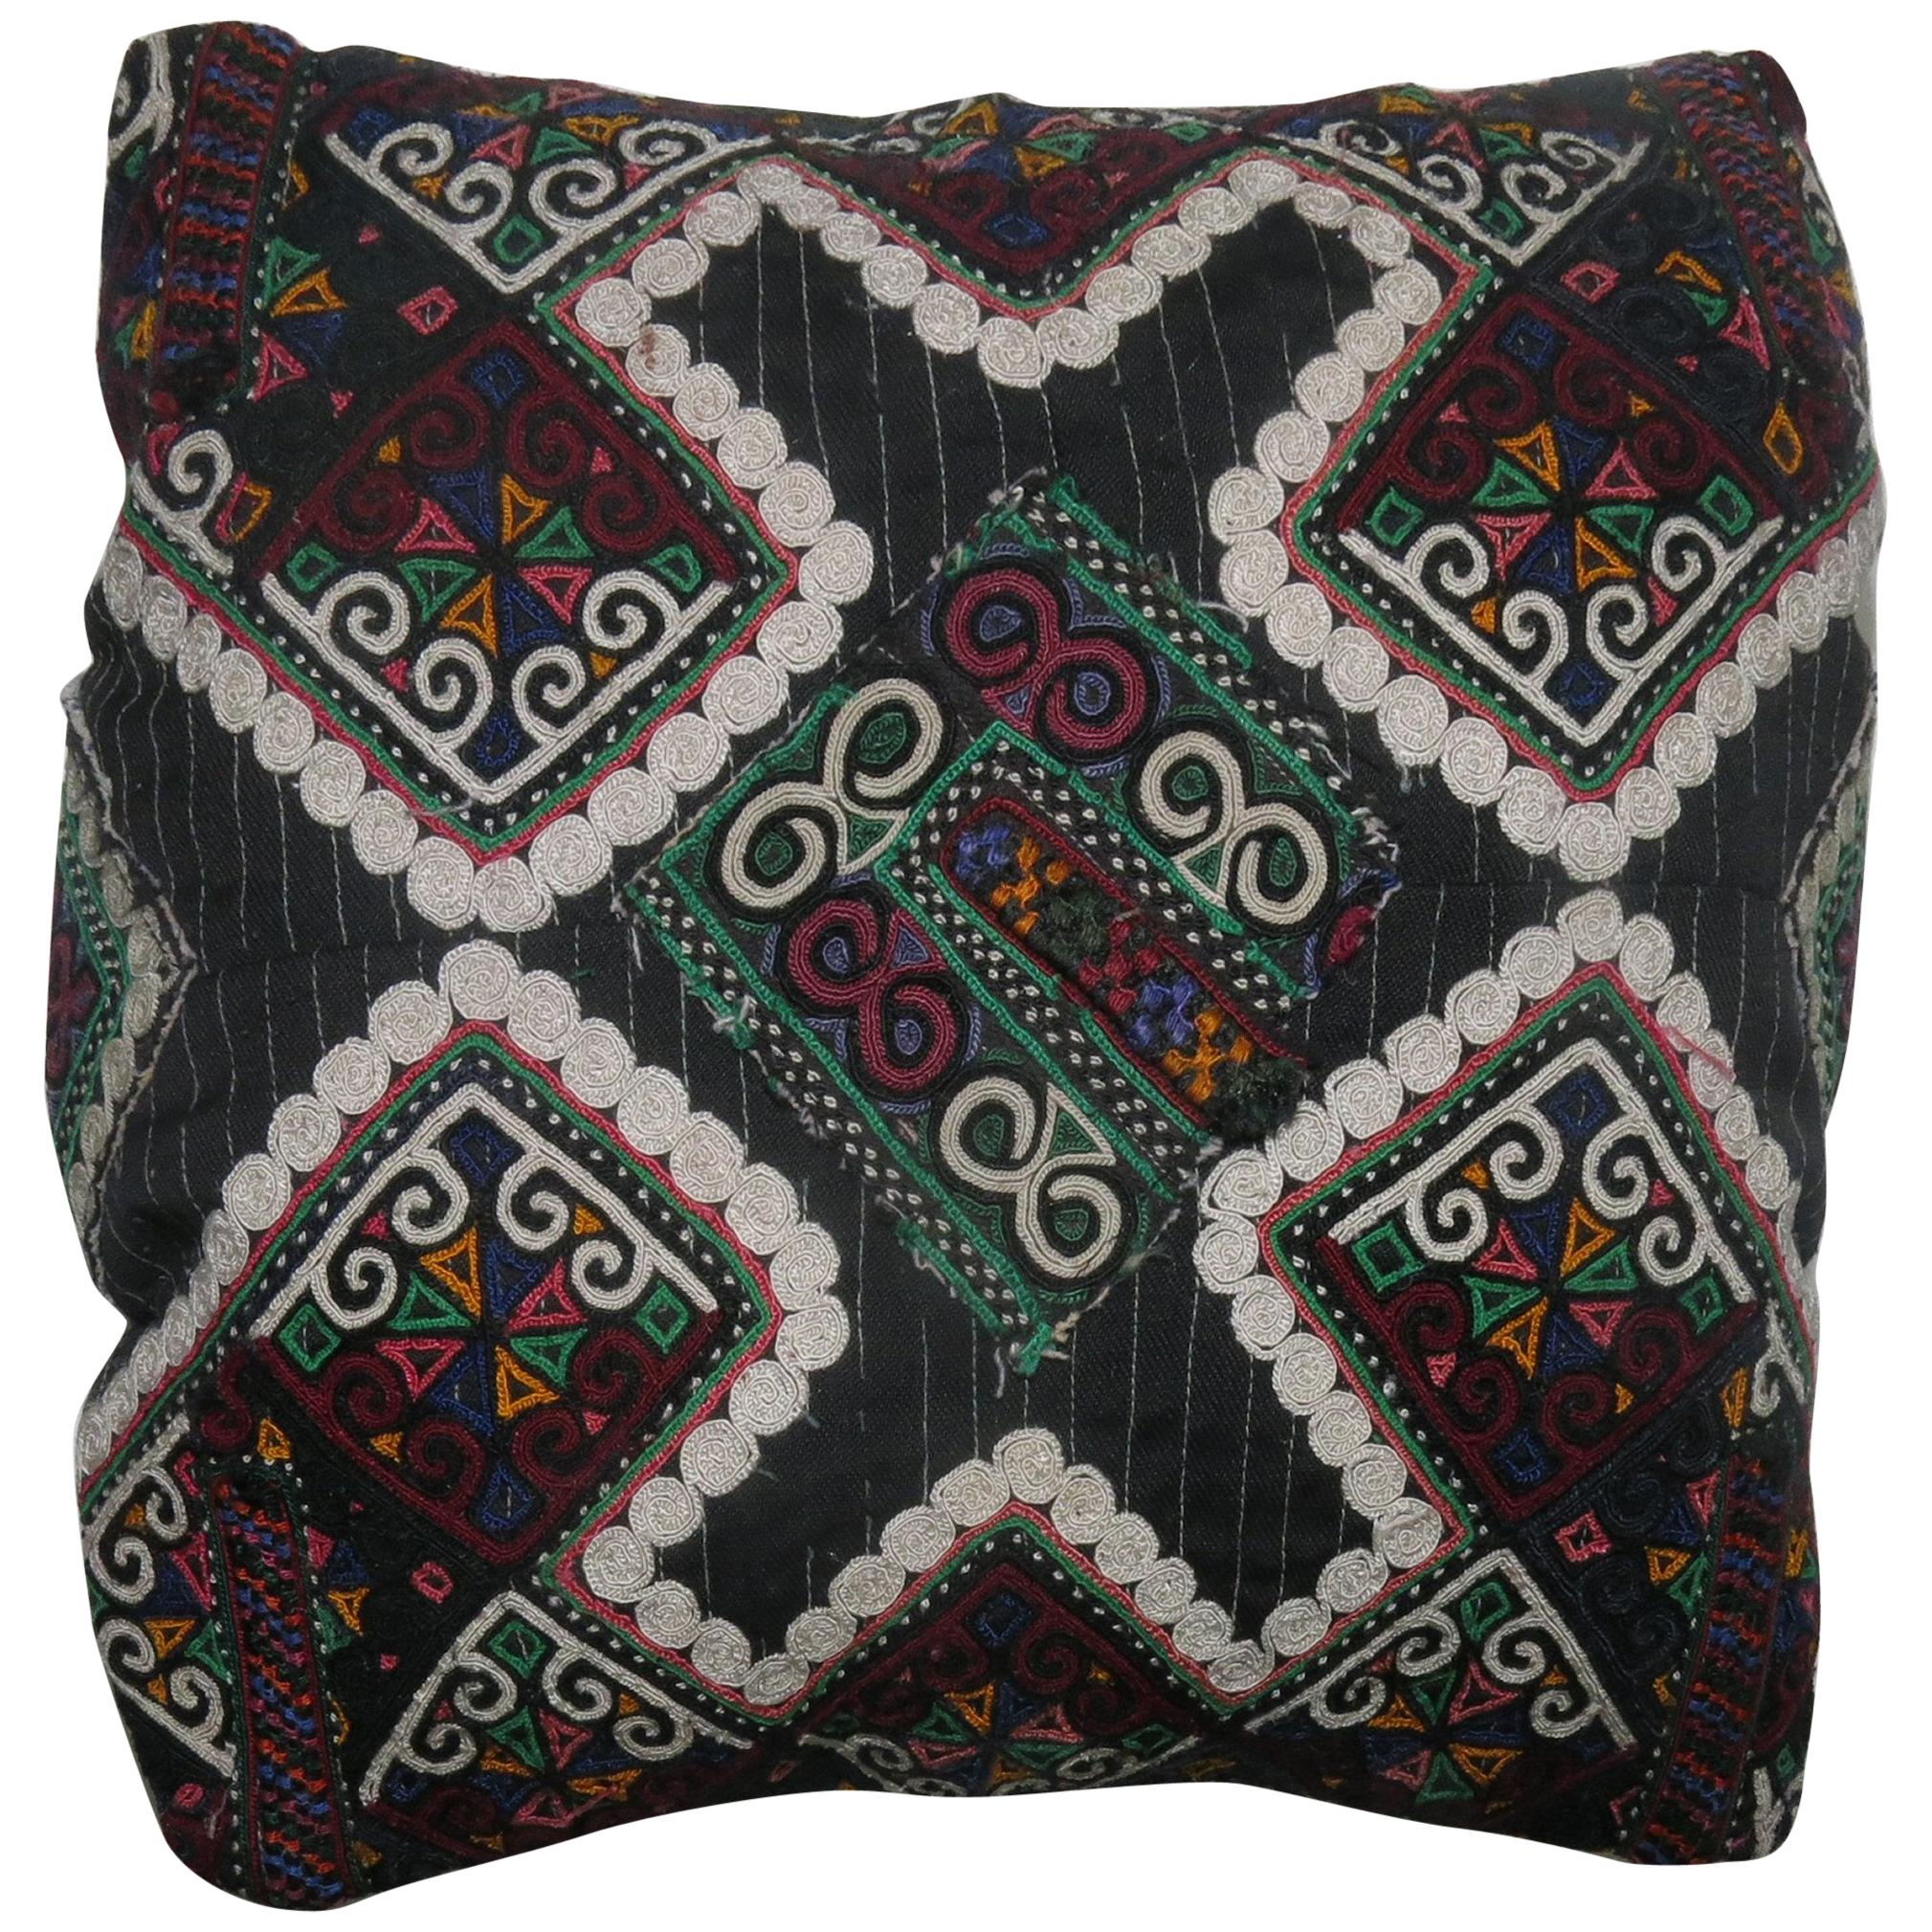 Embroidered Suzanni Textile Pillow